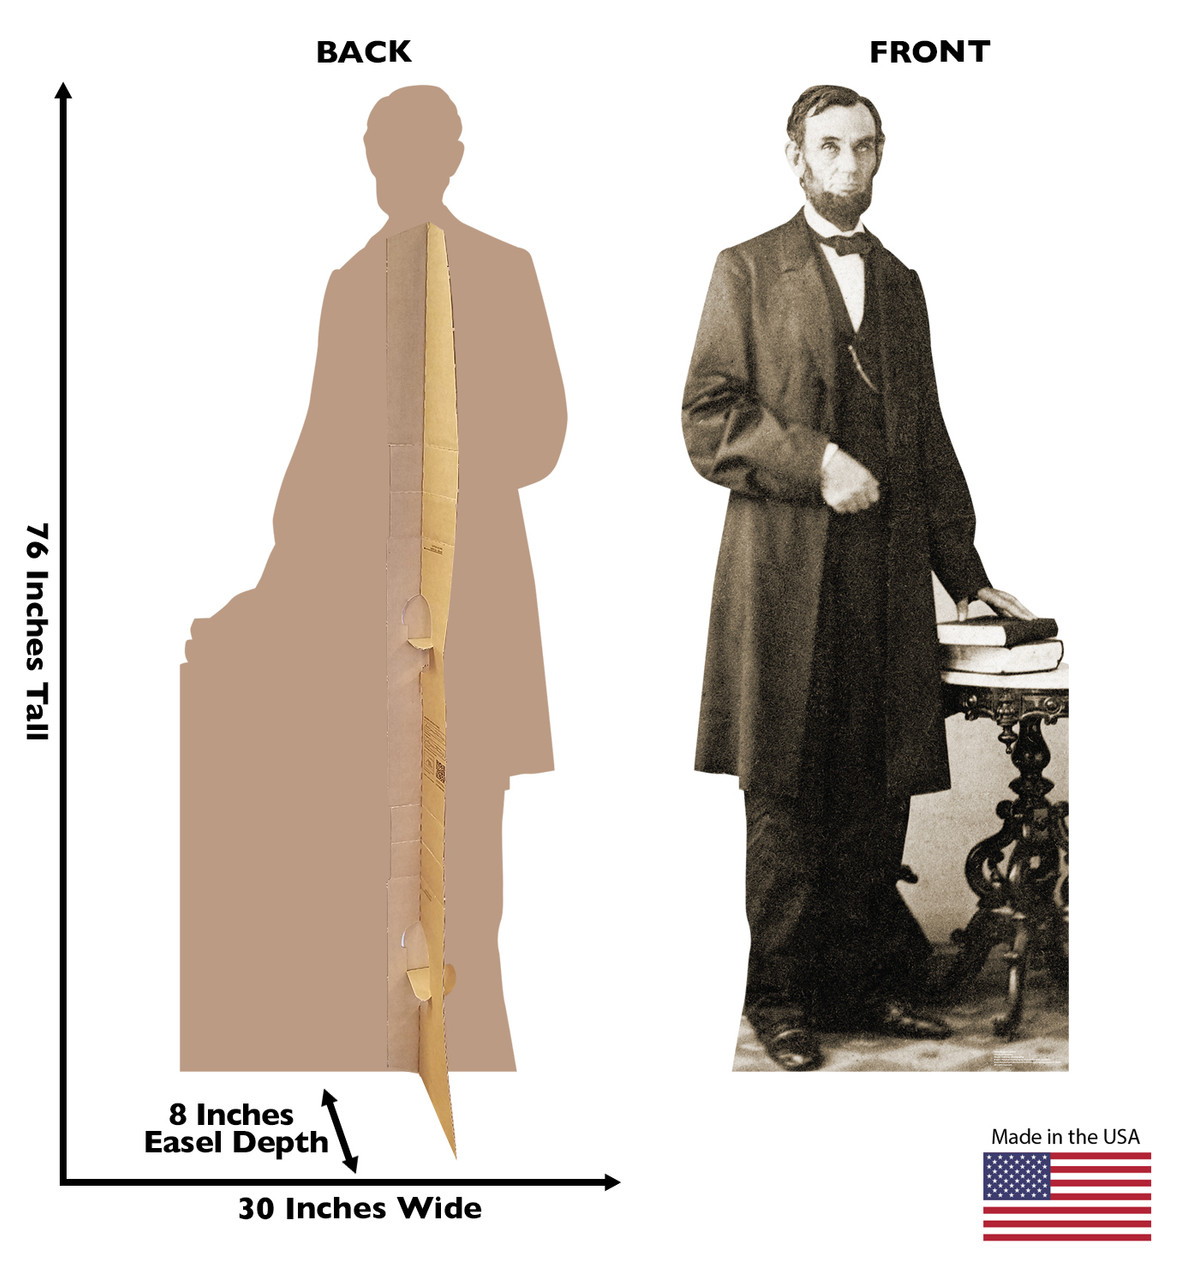 Life-size cardboard standee of Abraham Lincoln with back and front dimensions.